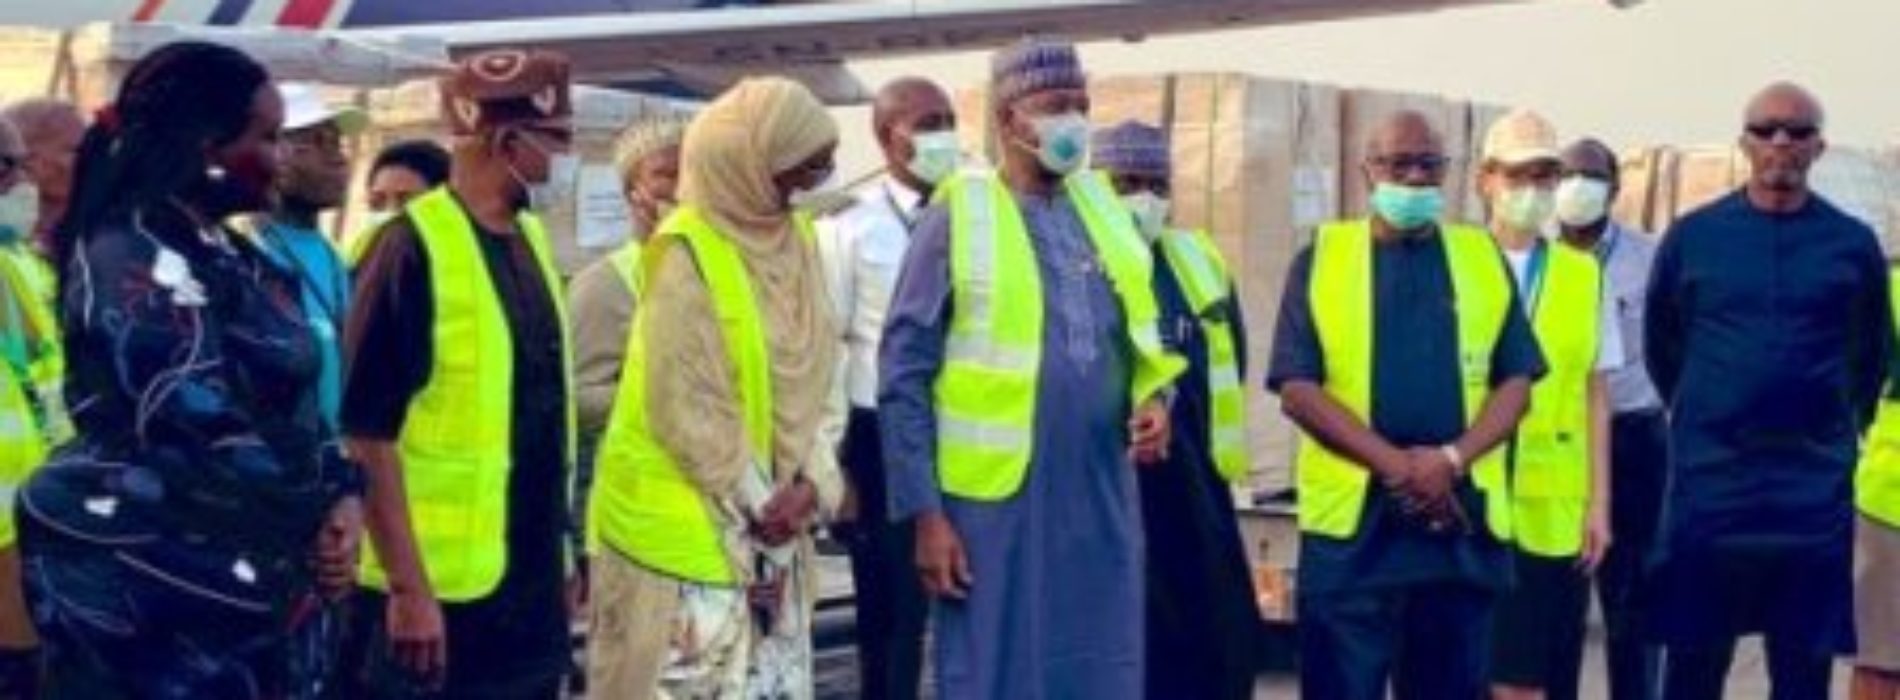 FG receives medical equipment to fight COVID-19